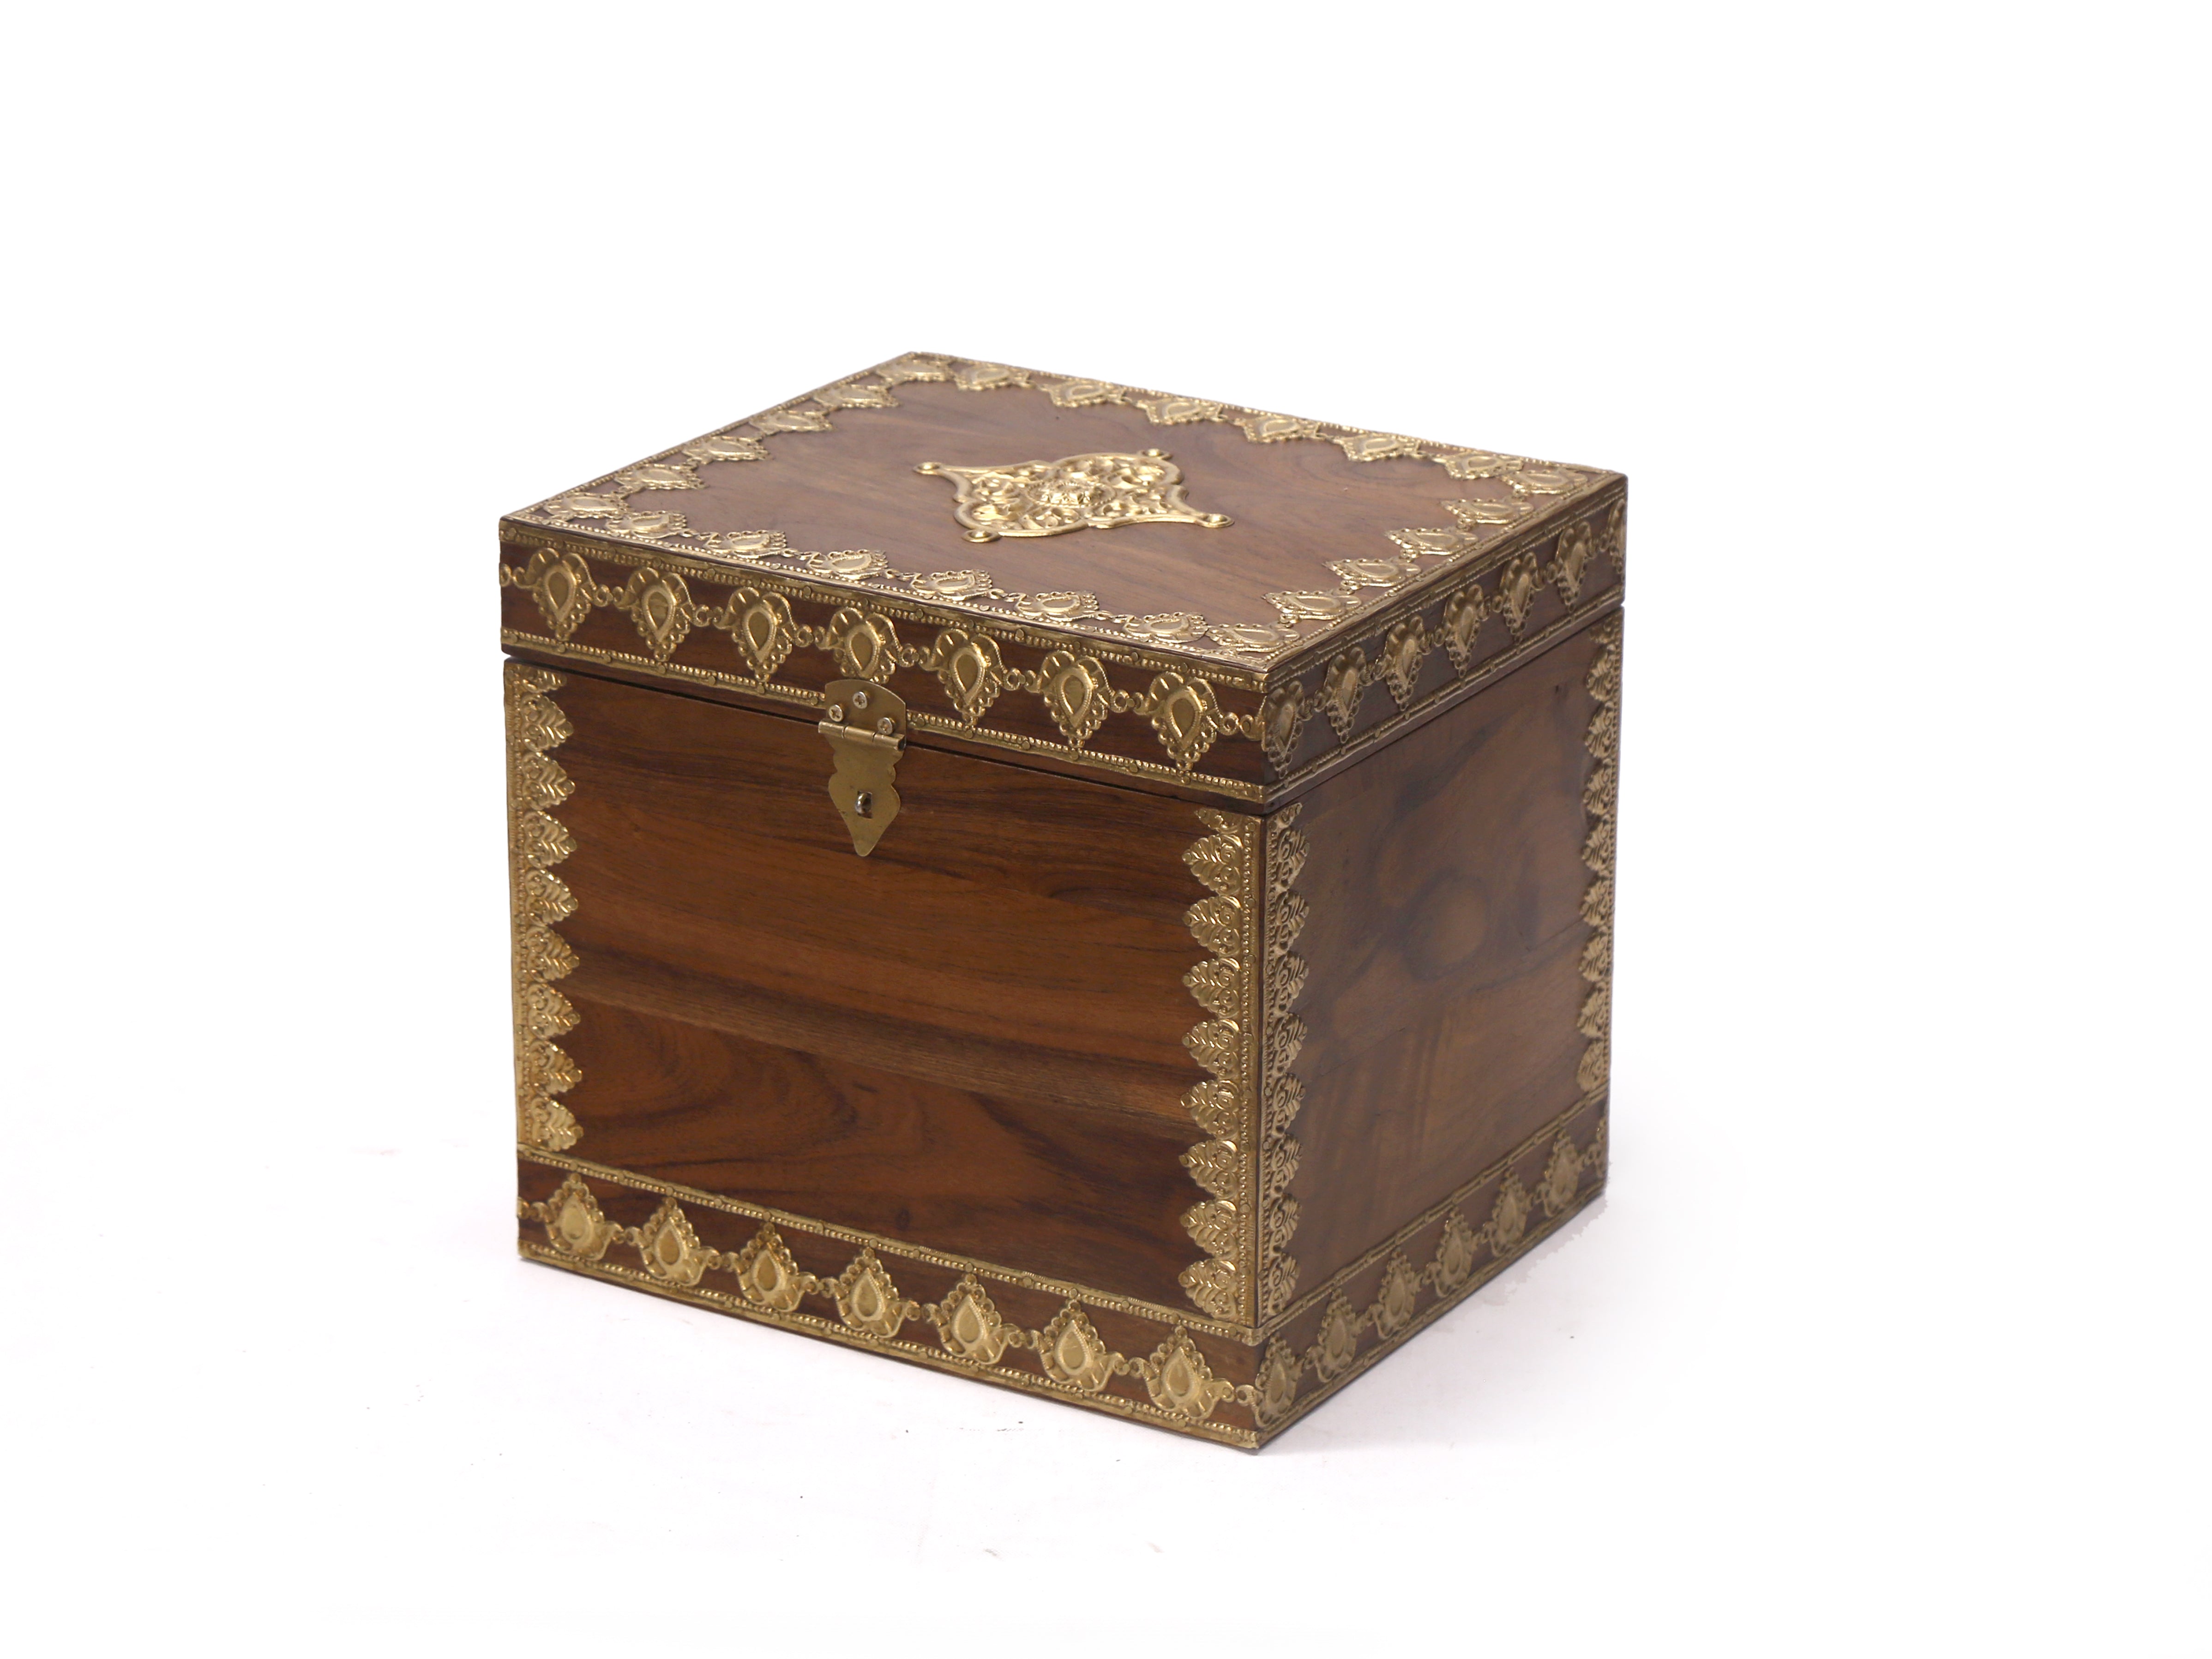 Wooden Square Box Large (10 x 9 x 9 Inch) Wooden Box